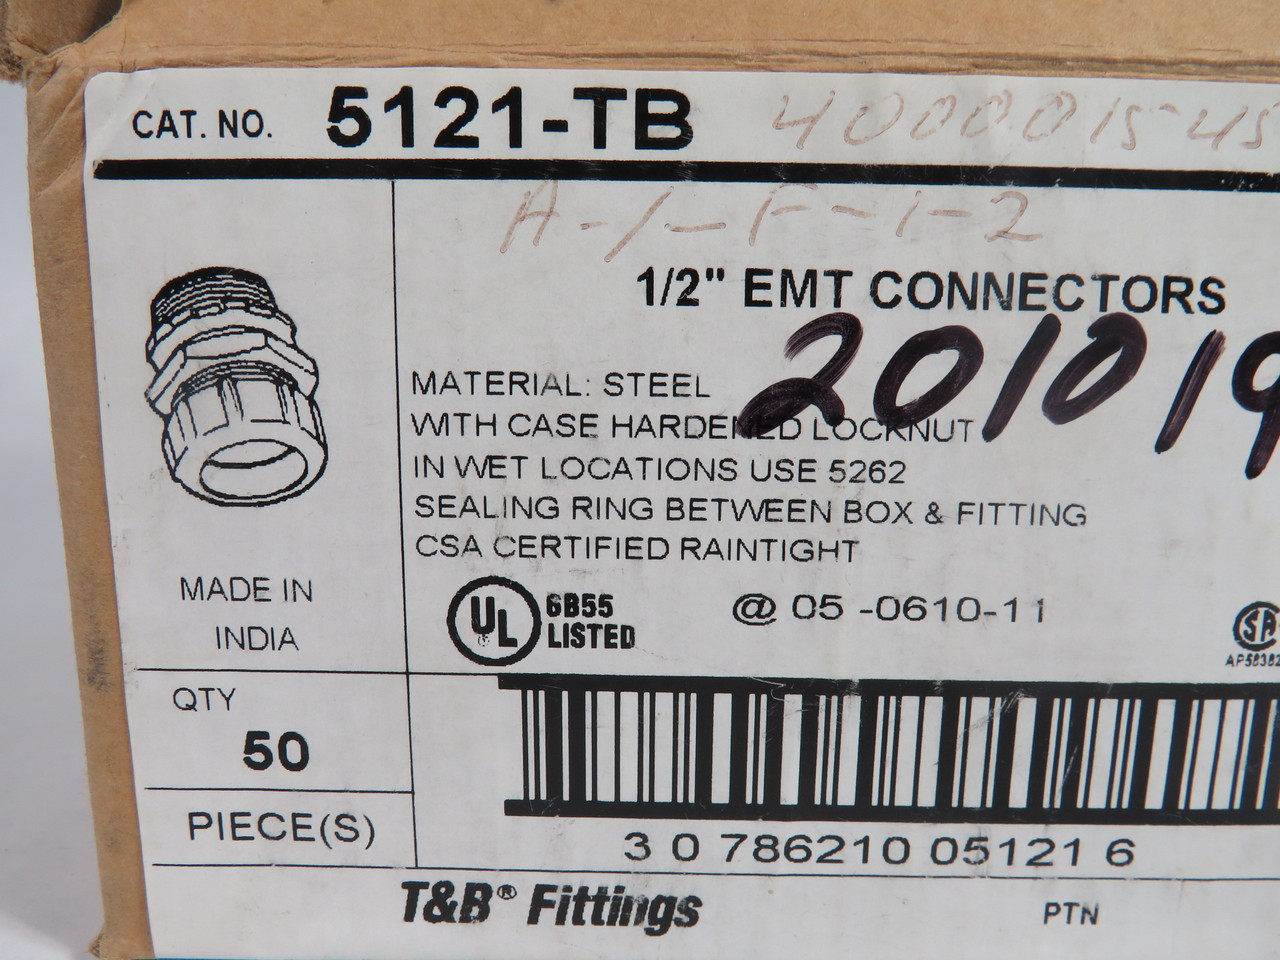 Thomas & Betts 5121-TB EMT Connector 1/2" Lot of 37 NEW